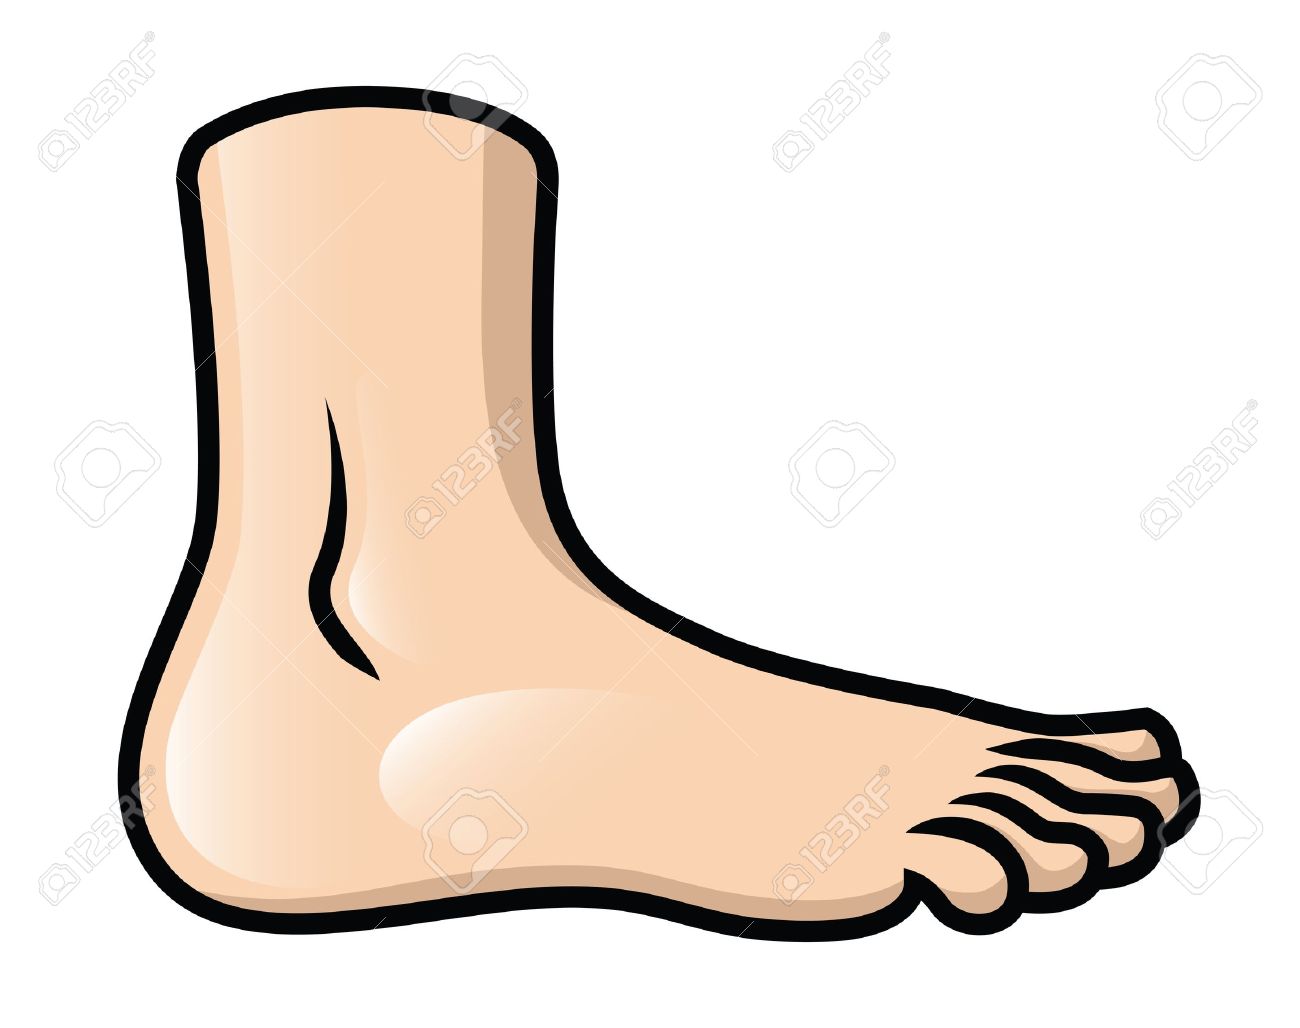 Foot Clipart Images.